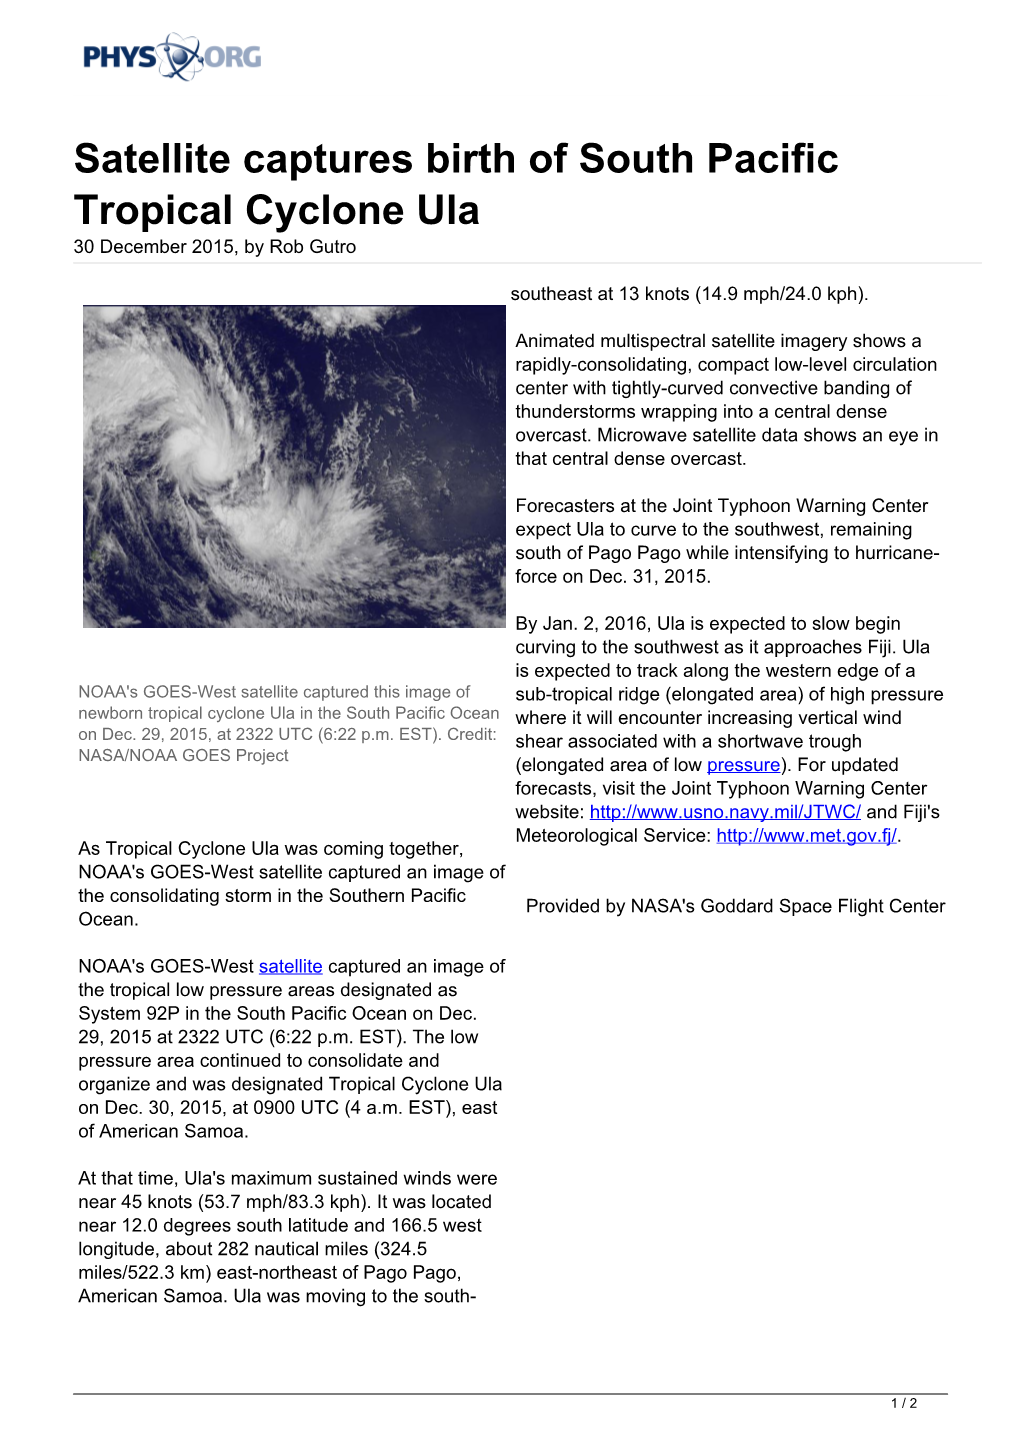 Satellite Captures Birth of South Pacific Tropical Cyclone Ula 30 December 2015, by Rob Gutro